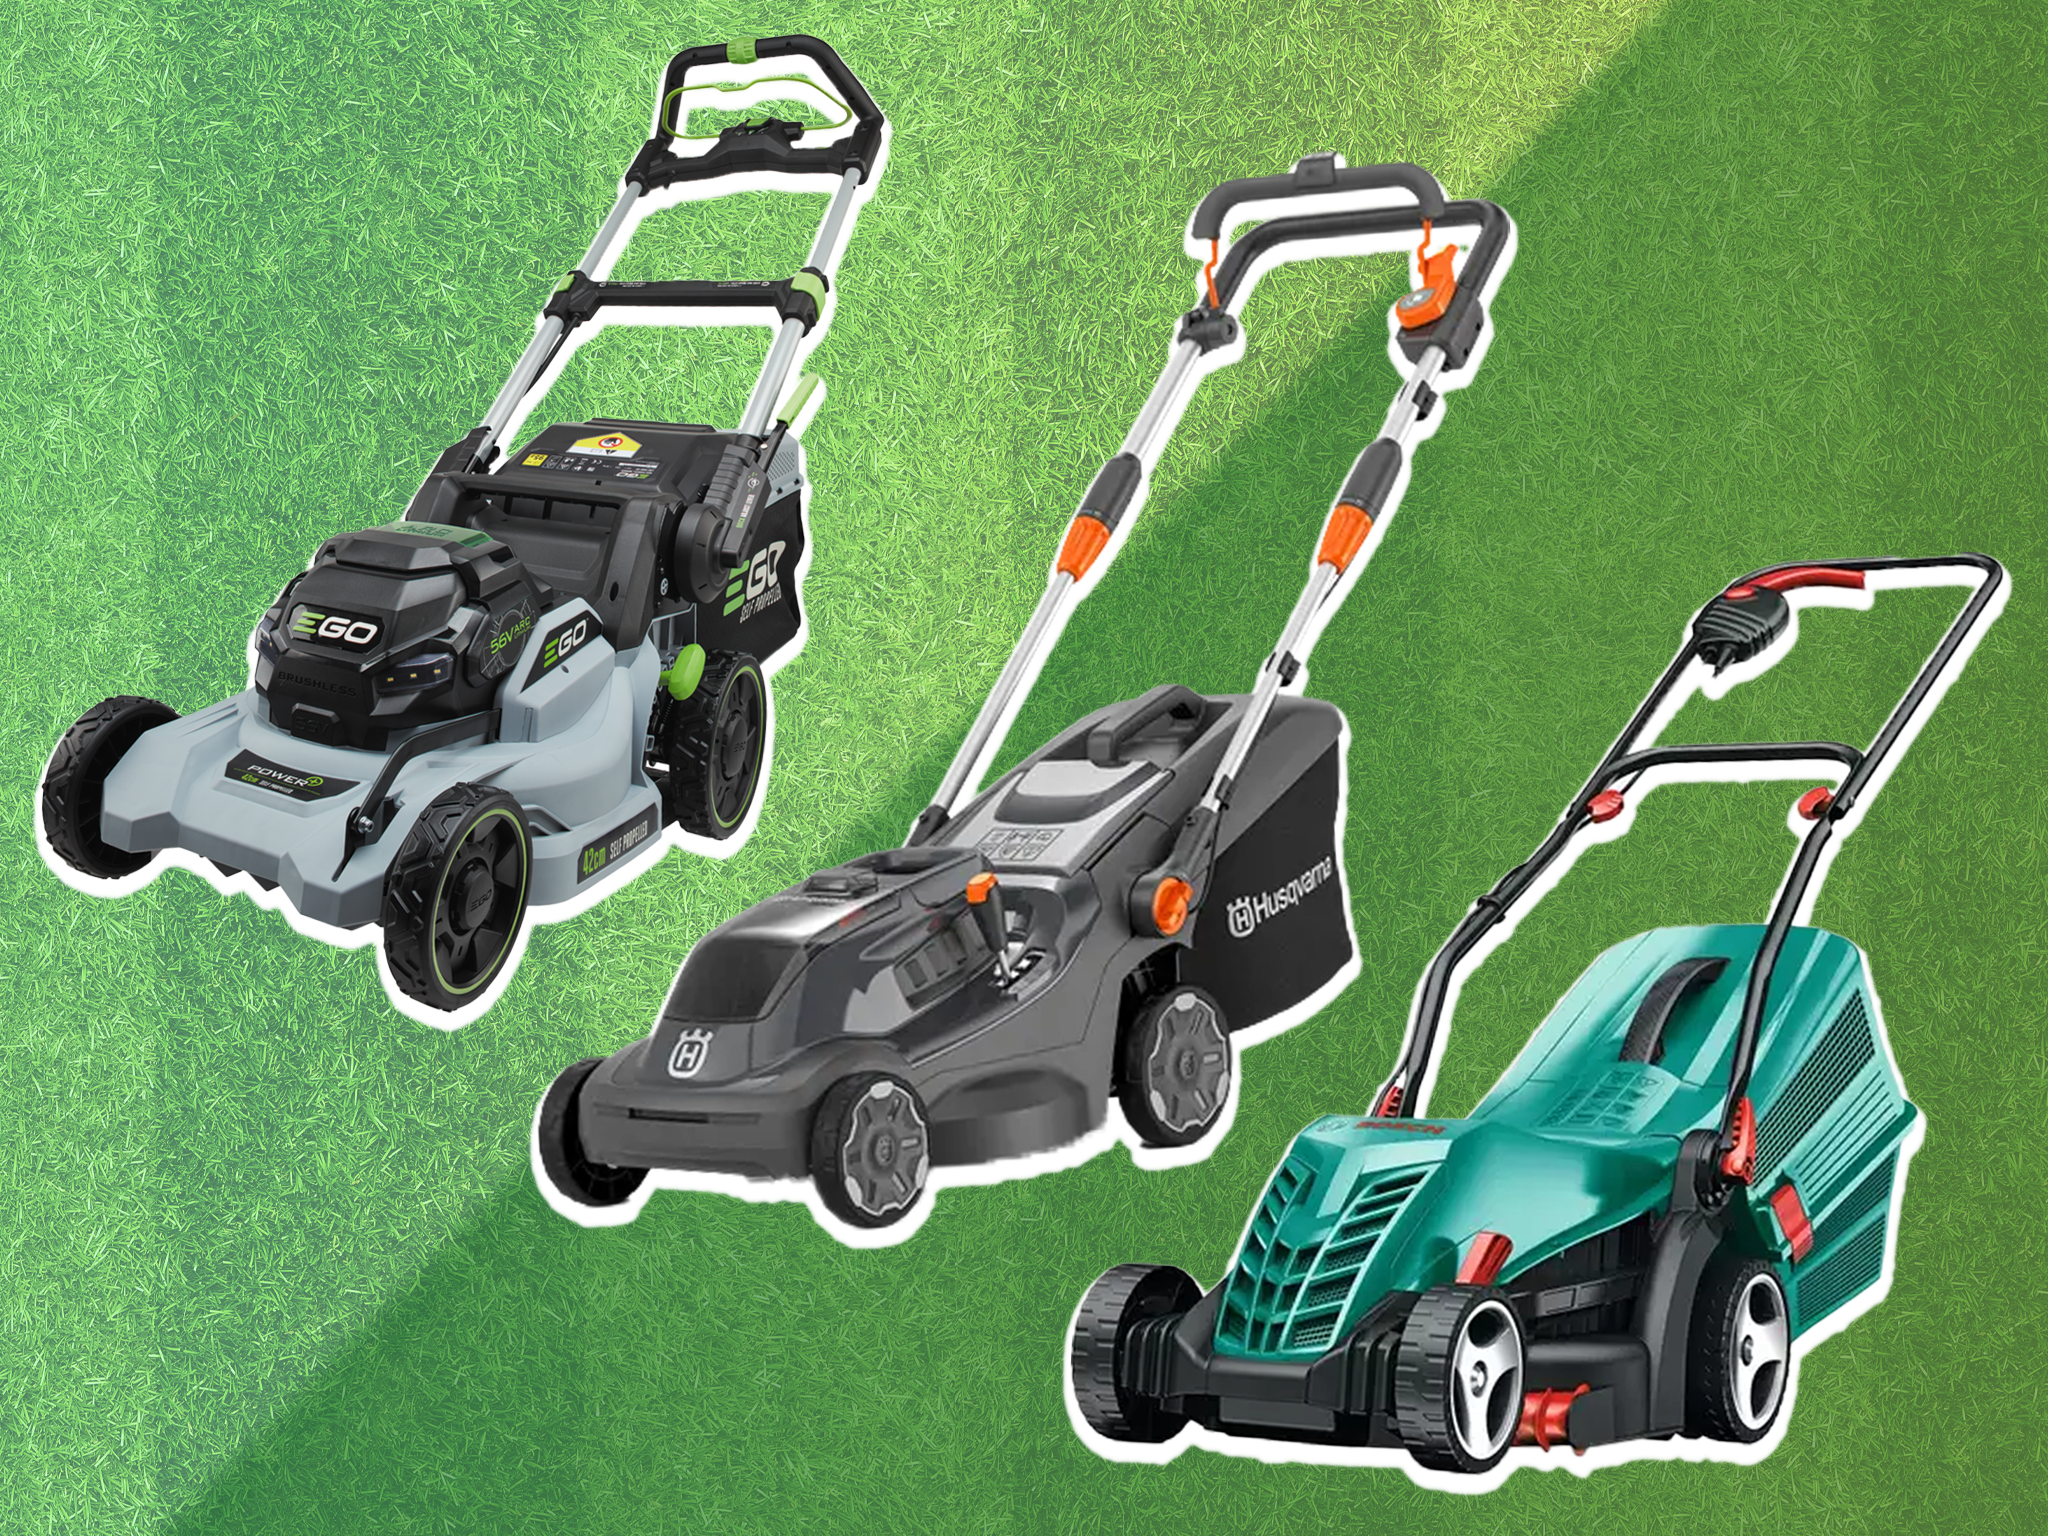 https://static.independent.co.uk/2023/07/17/16/Lawn%20mowers.png